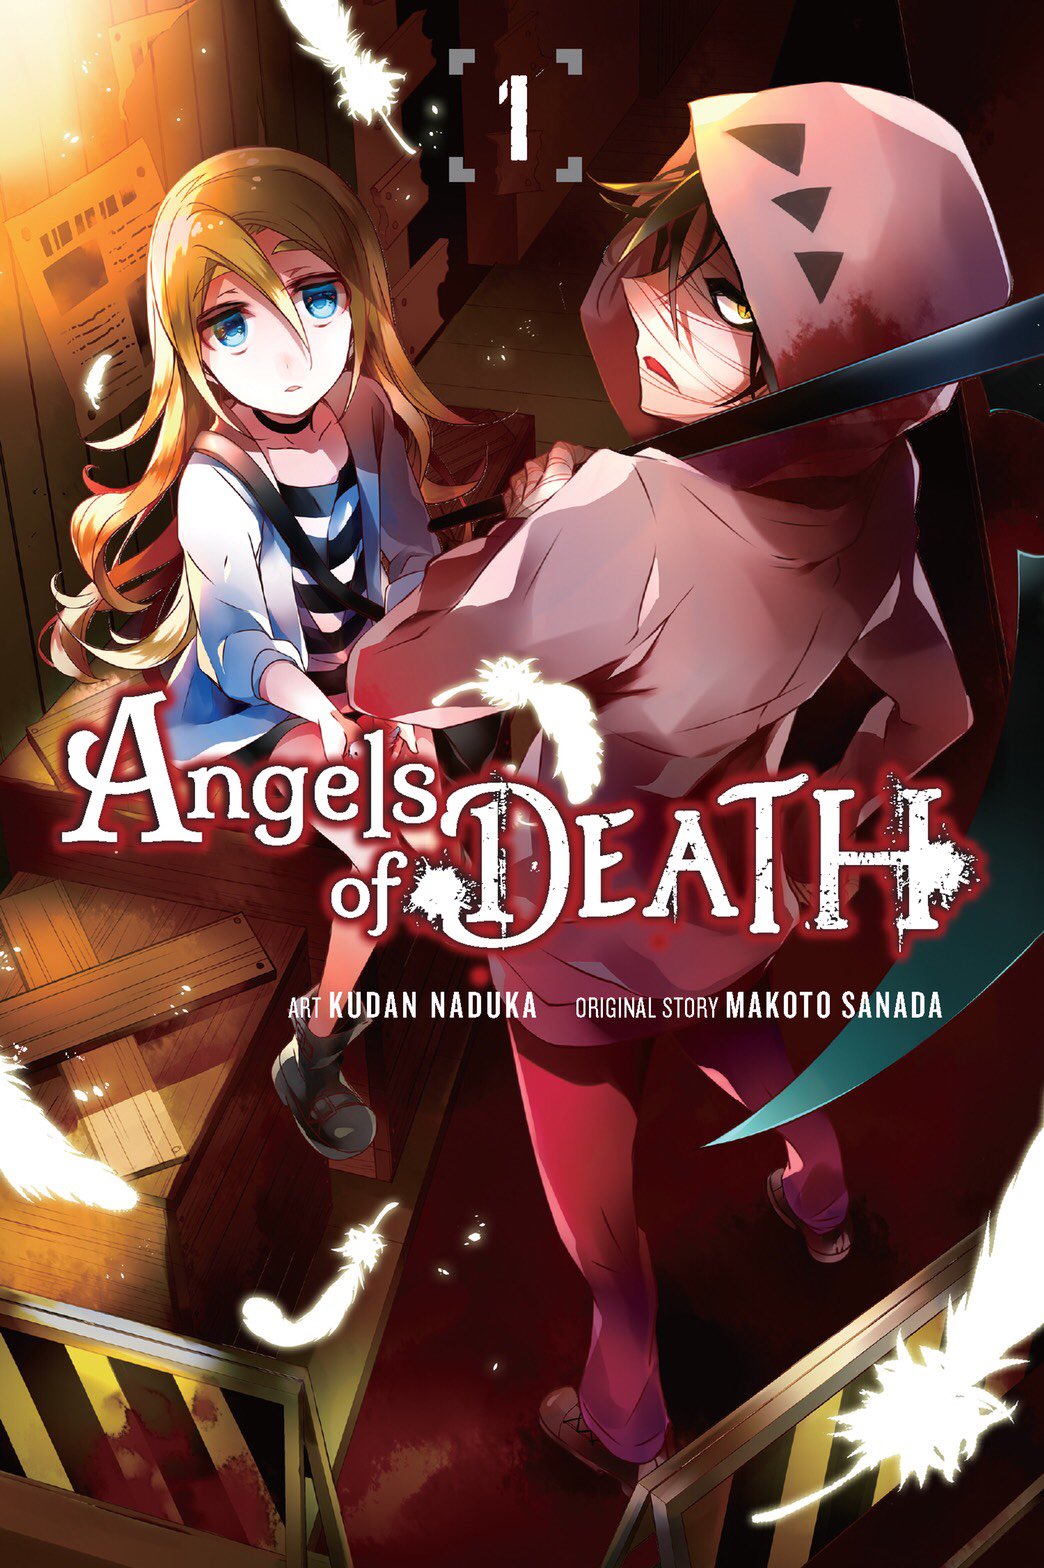 Angels of Death - Introducing new goods! This is a